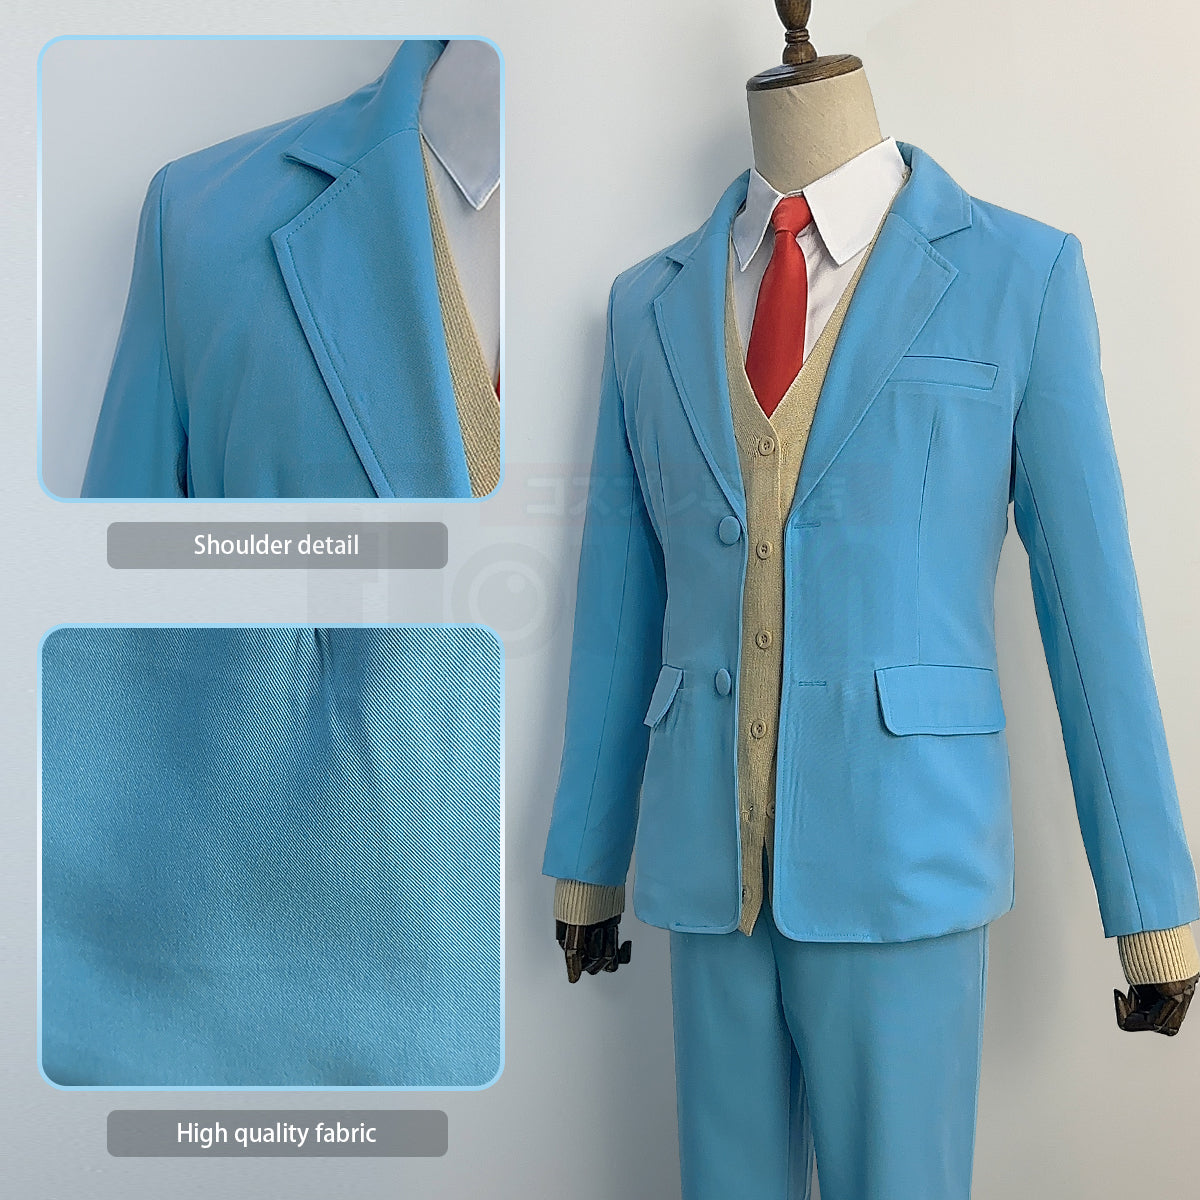 HOLOUN Skip and Loafer Anime Shima Sousukee Cosplay Costume School Uniform Blue Suit Shirt Pants Sweater Tie Daily Wearing Gift